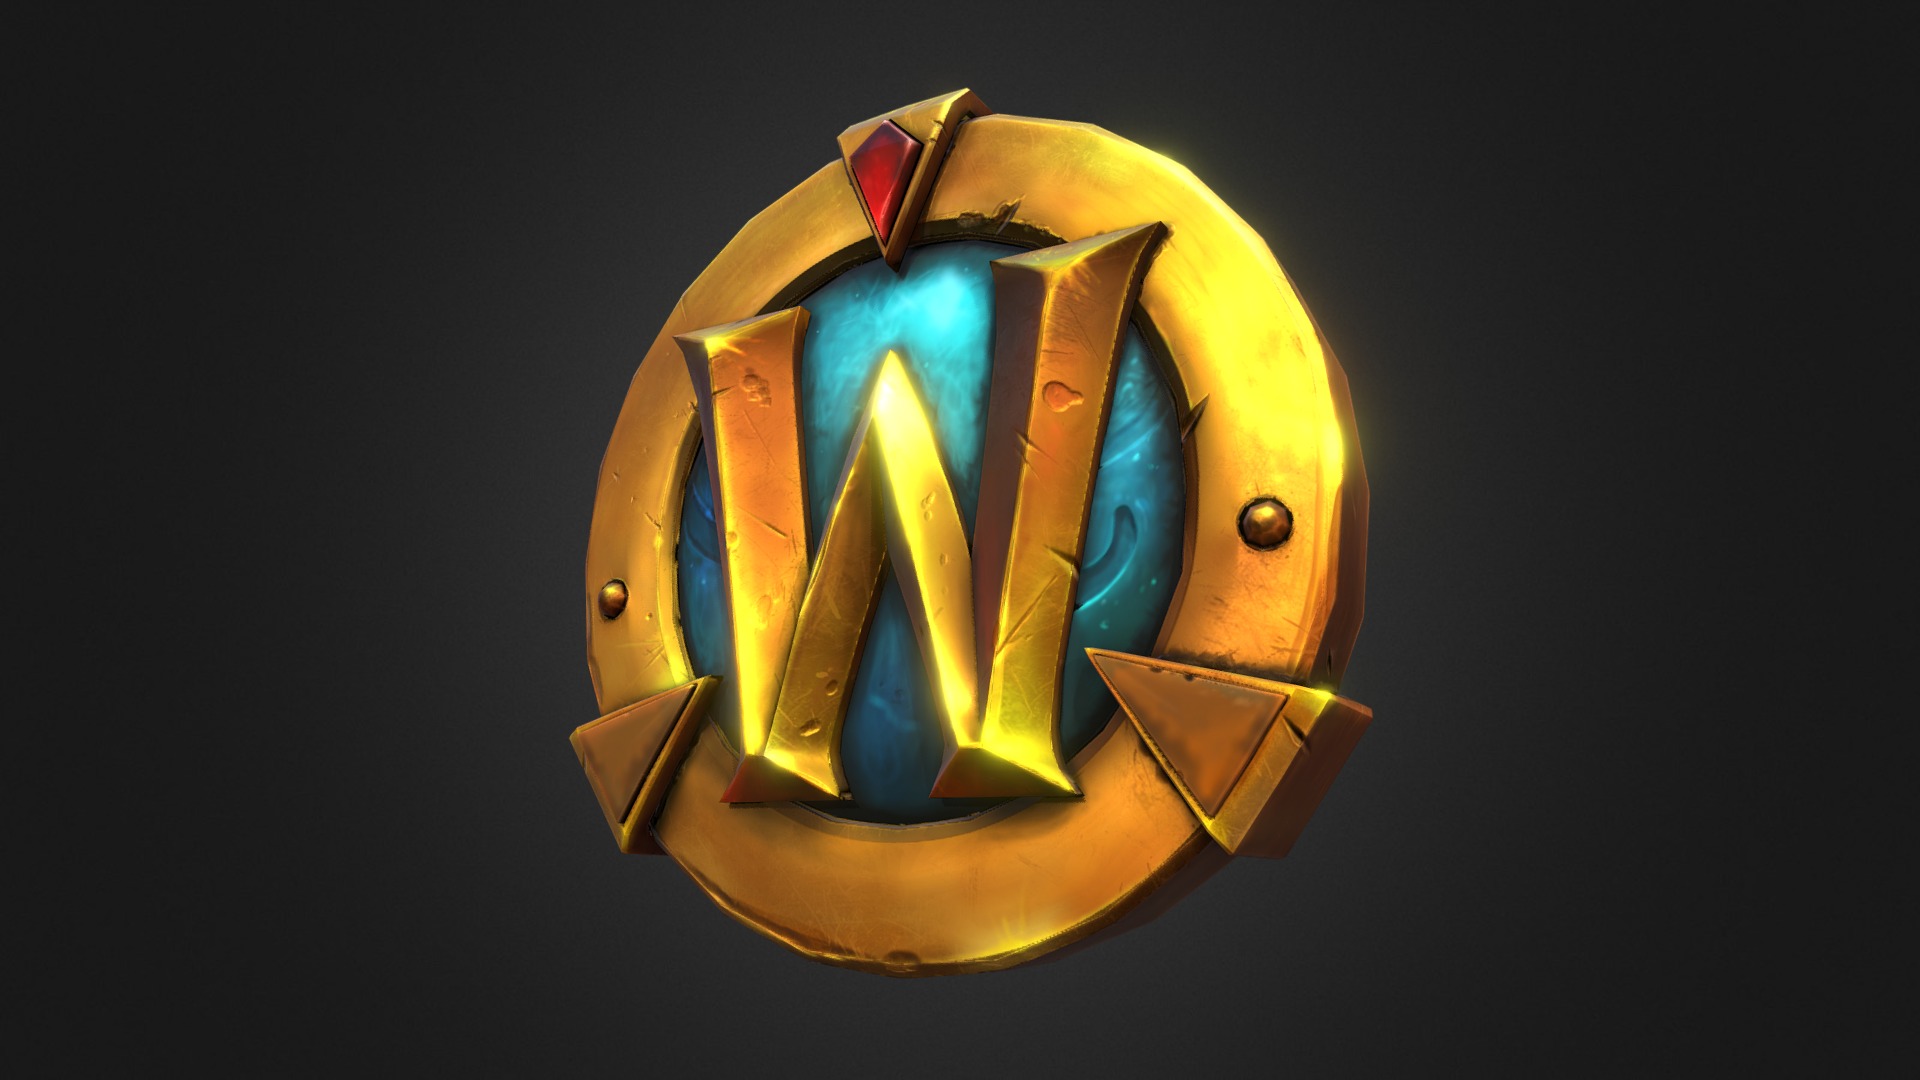 3D model World of Warcraft FanArt – Token - This is a 3D model of the World of Warcraft FanArt - Token. The 3D model is about a gold and blue metal object.